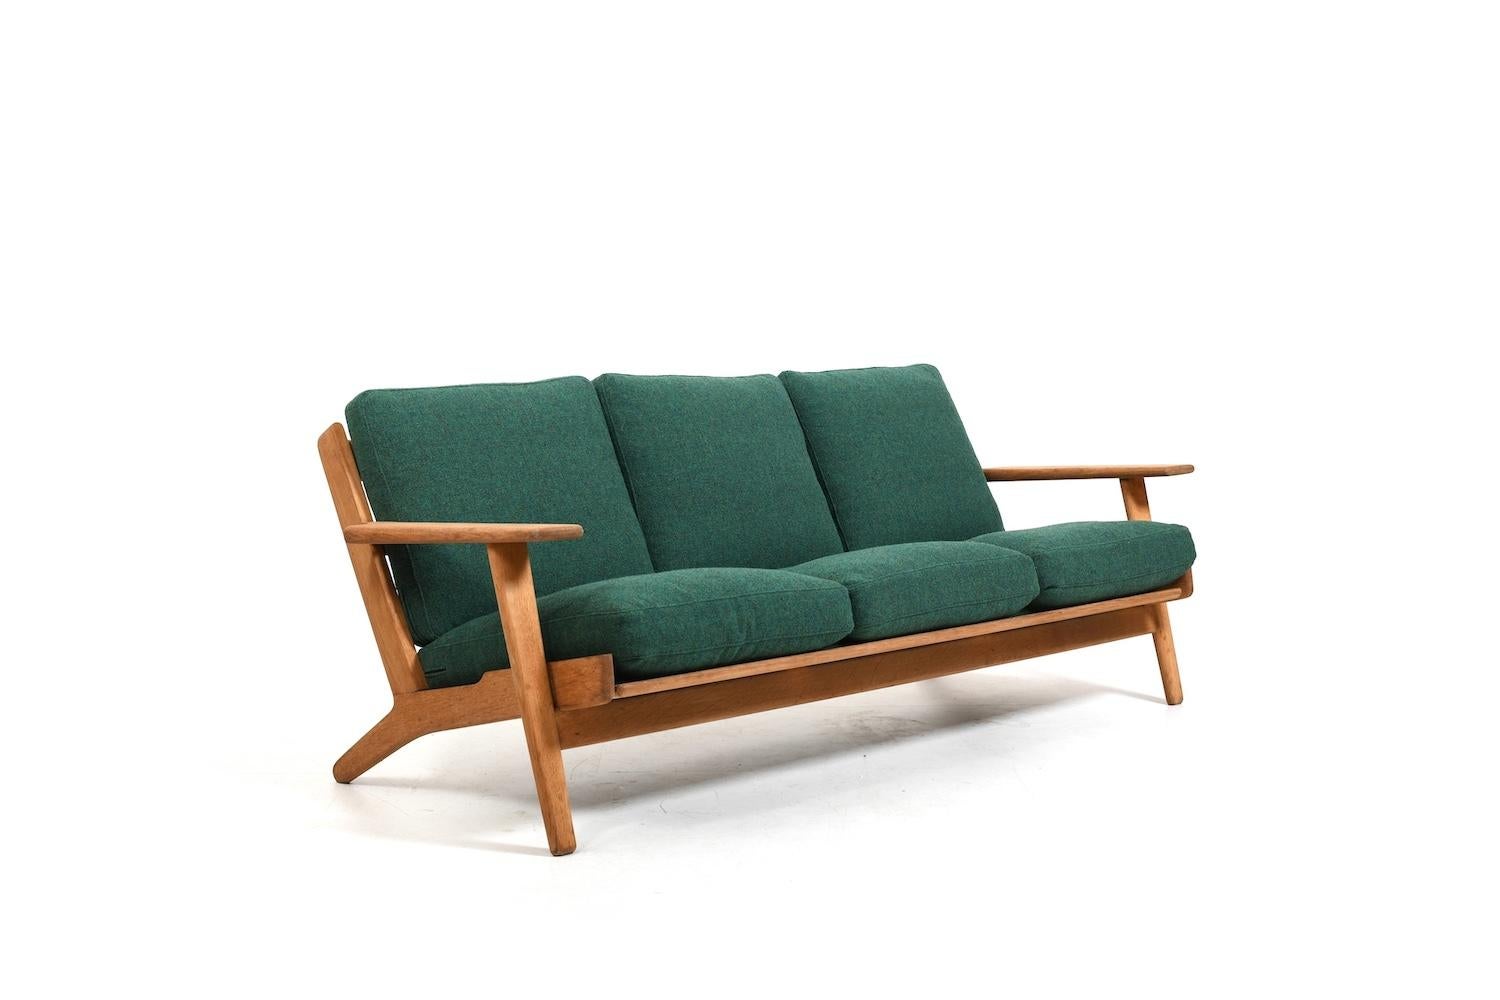 GE-290 / 3 sofa by Hans J. Wegner for Getama Denmark 1950s. Made in solid oak. New cushions with green fabric from Kvadrat and new stripes.. Sofa prod. 1950s. During the restoration, the later white Tripp Trapp color was removed. Occasionally still